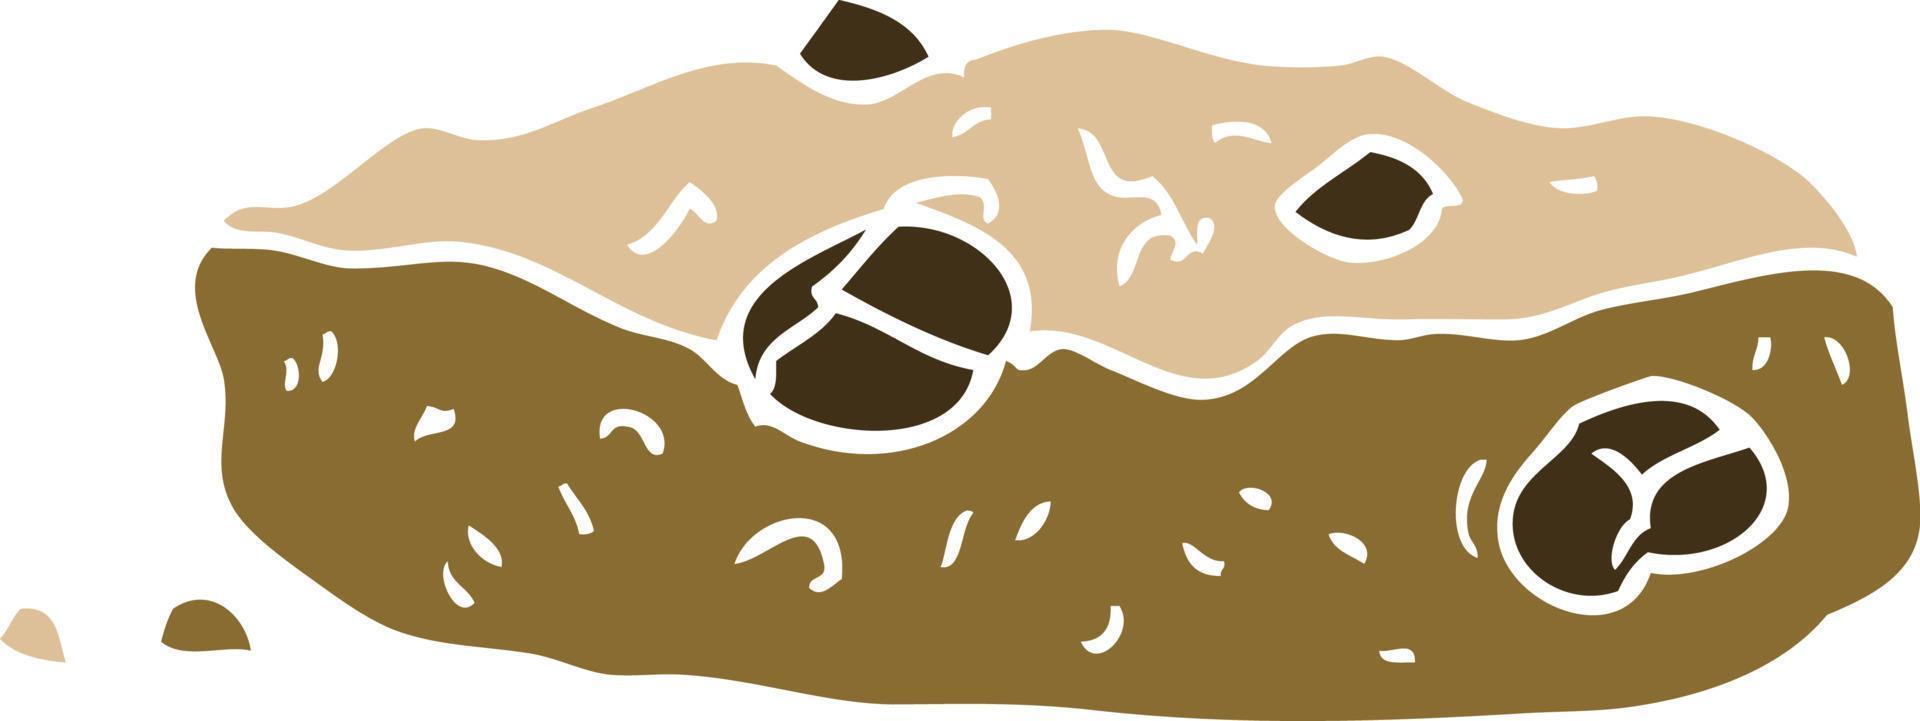 cartoon doodle choclate chip cookie vector